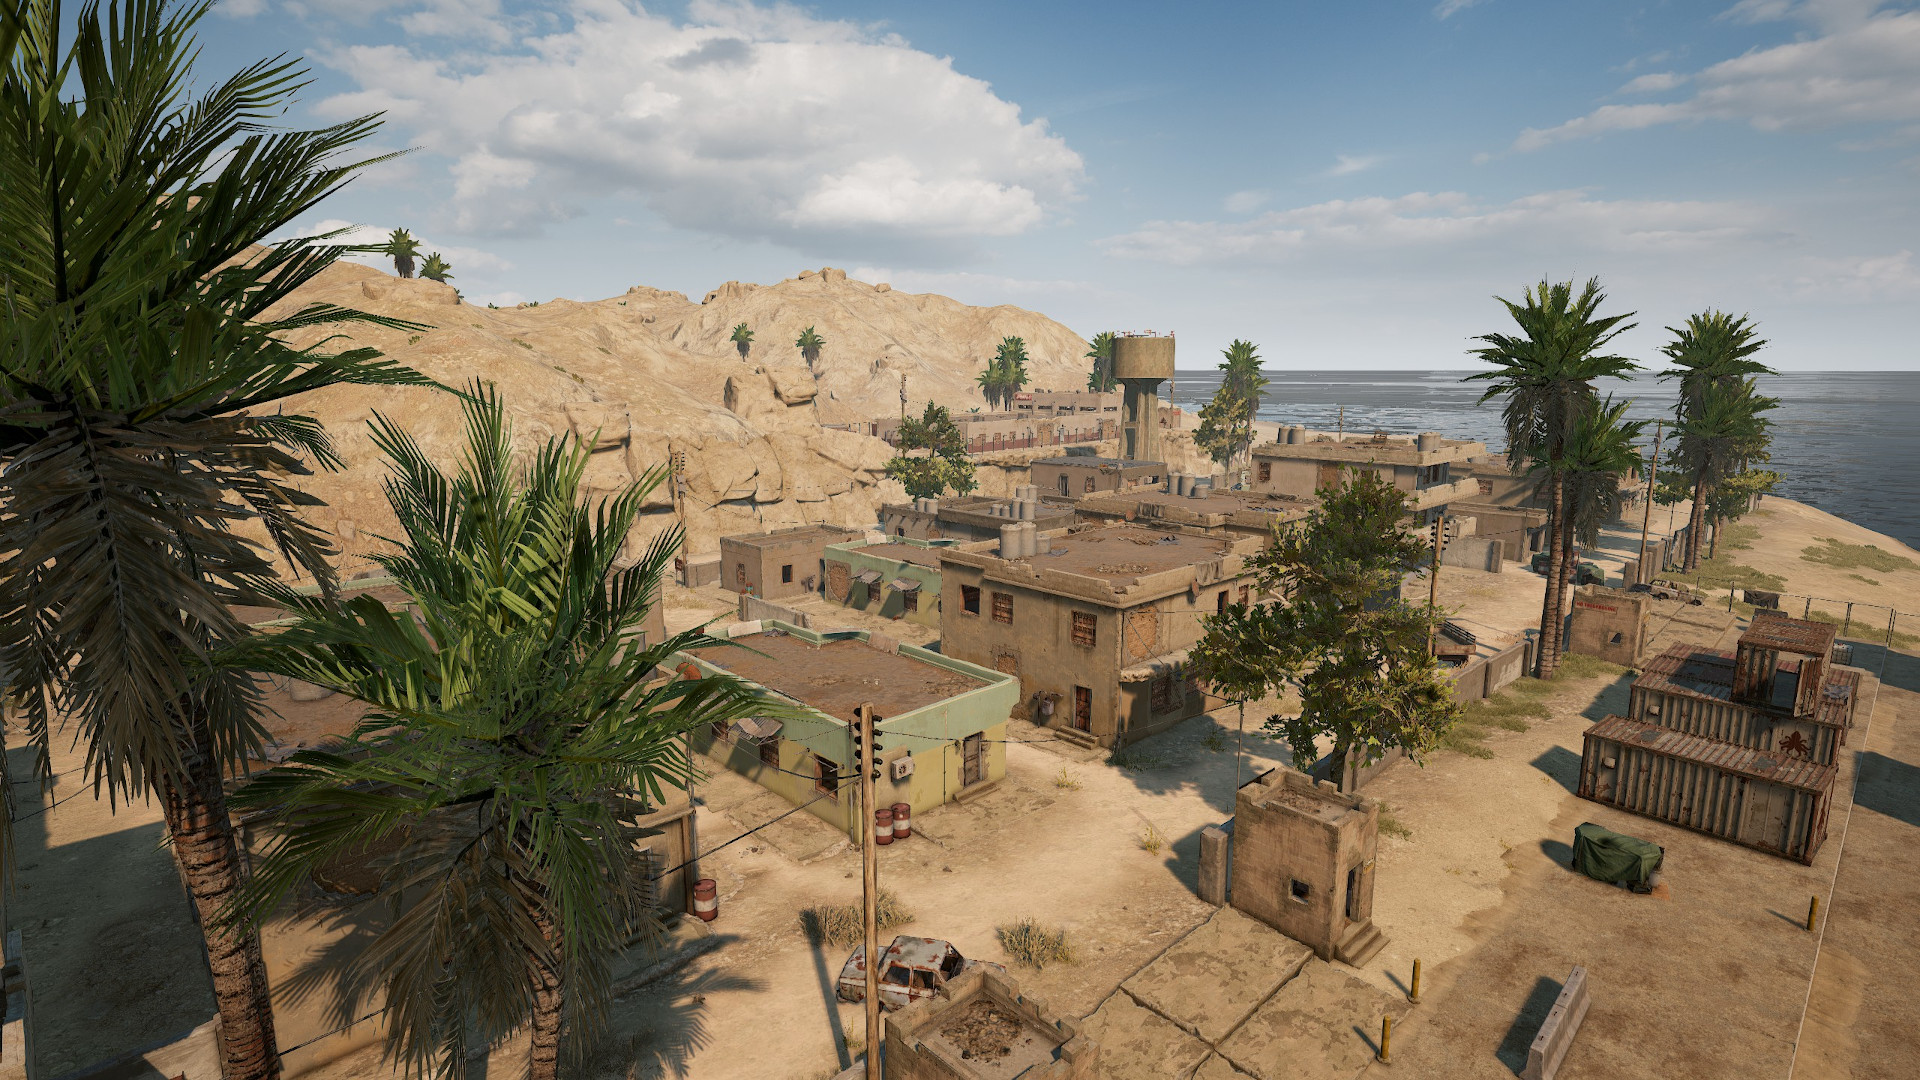 Best PUBG Karakin drops: Bahr Sahir, a dense town with low buildings and large trees next to the sea.